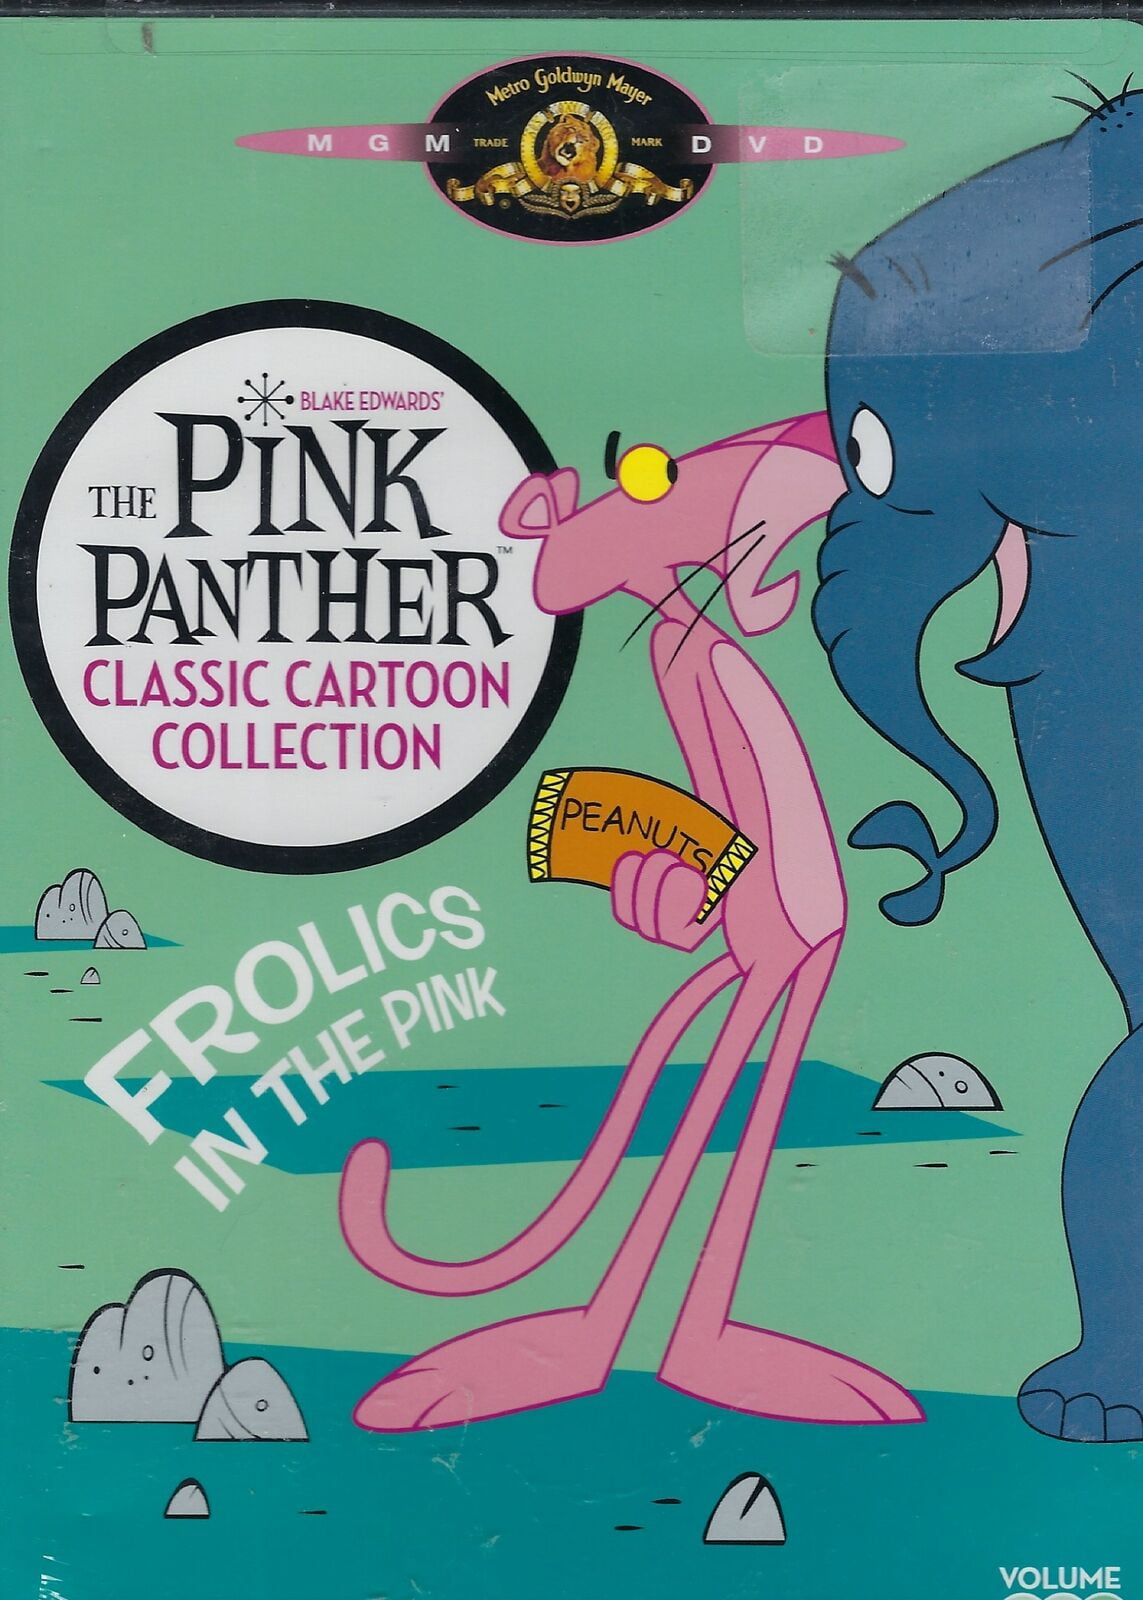 Best Buy: The Pink Panther Classic Cartoon Collection [Blu-ray]